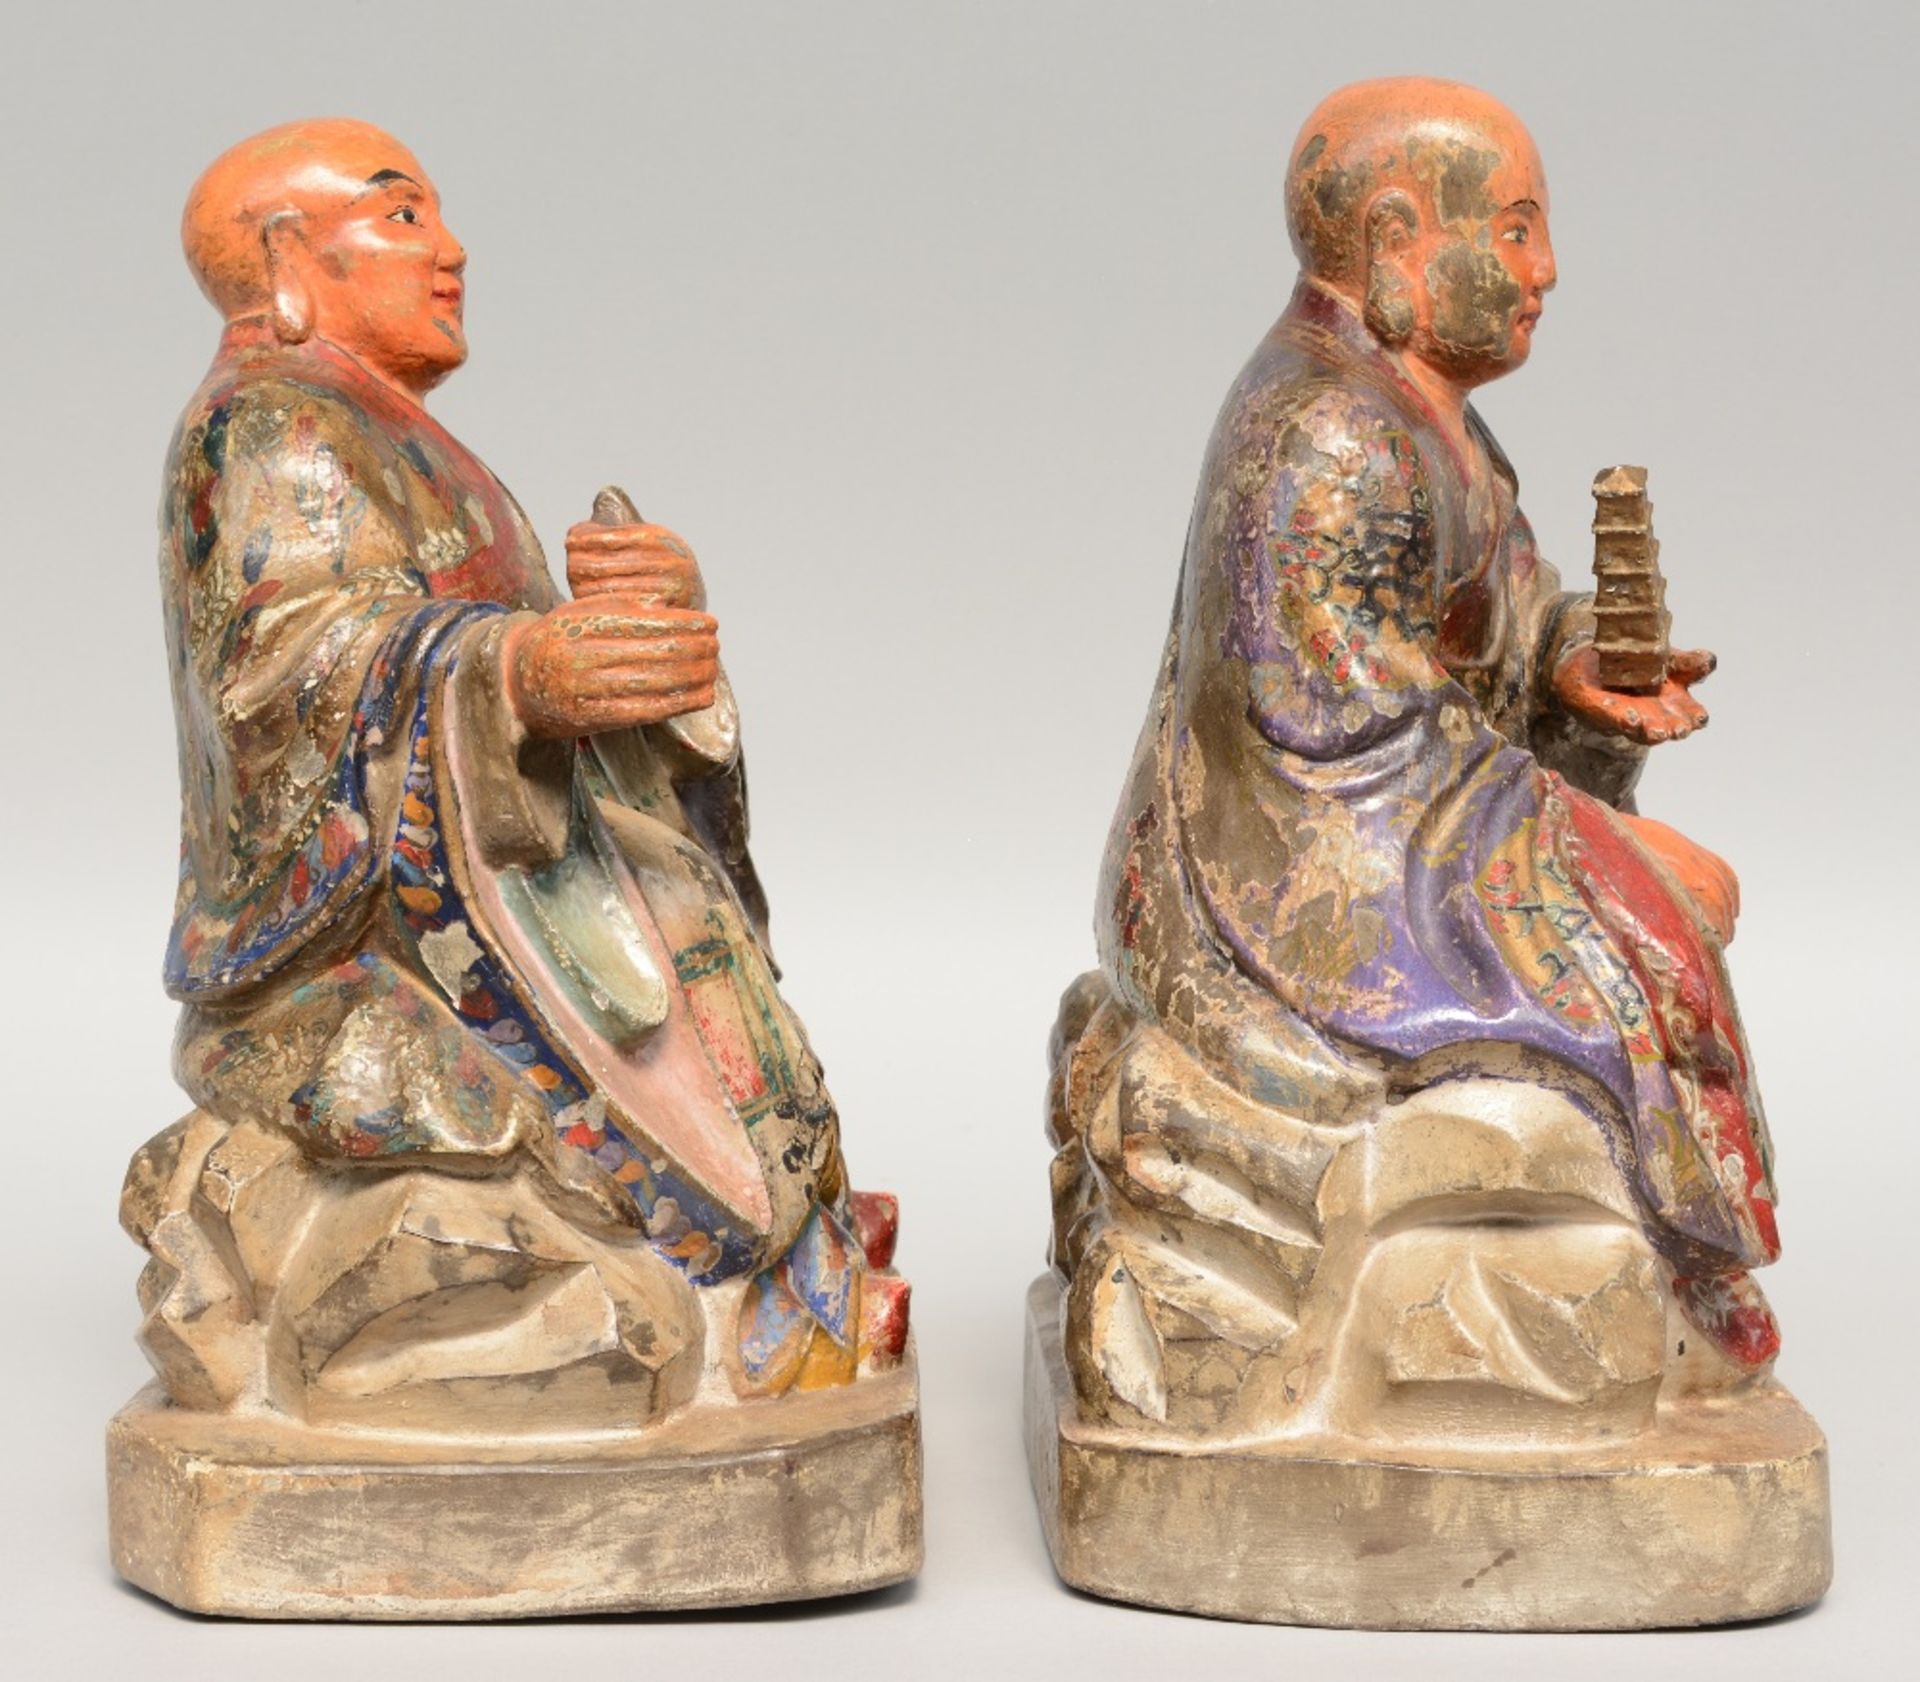 Two Oriental polychromed wooden Buddhist monks, ca. 1900, H 31 - 32 cm (damage to the polychrome) - Image 4 of 5